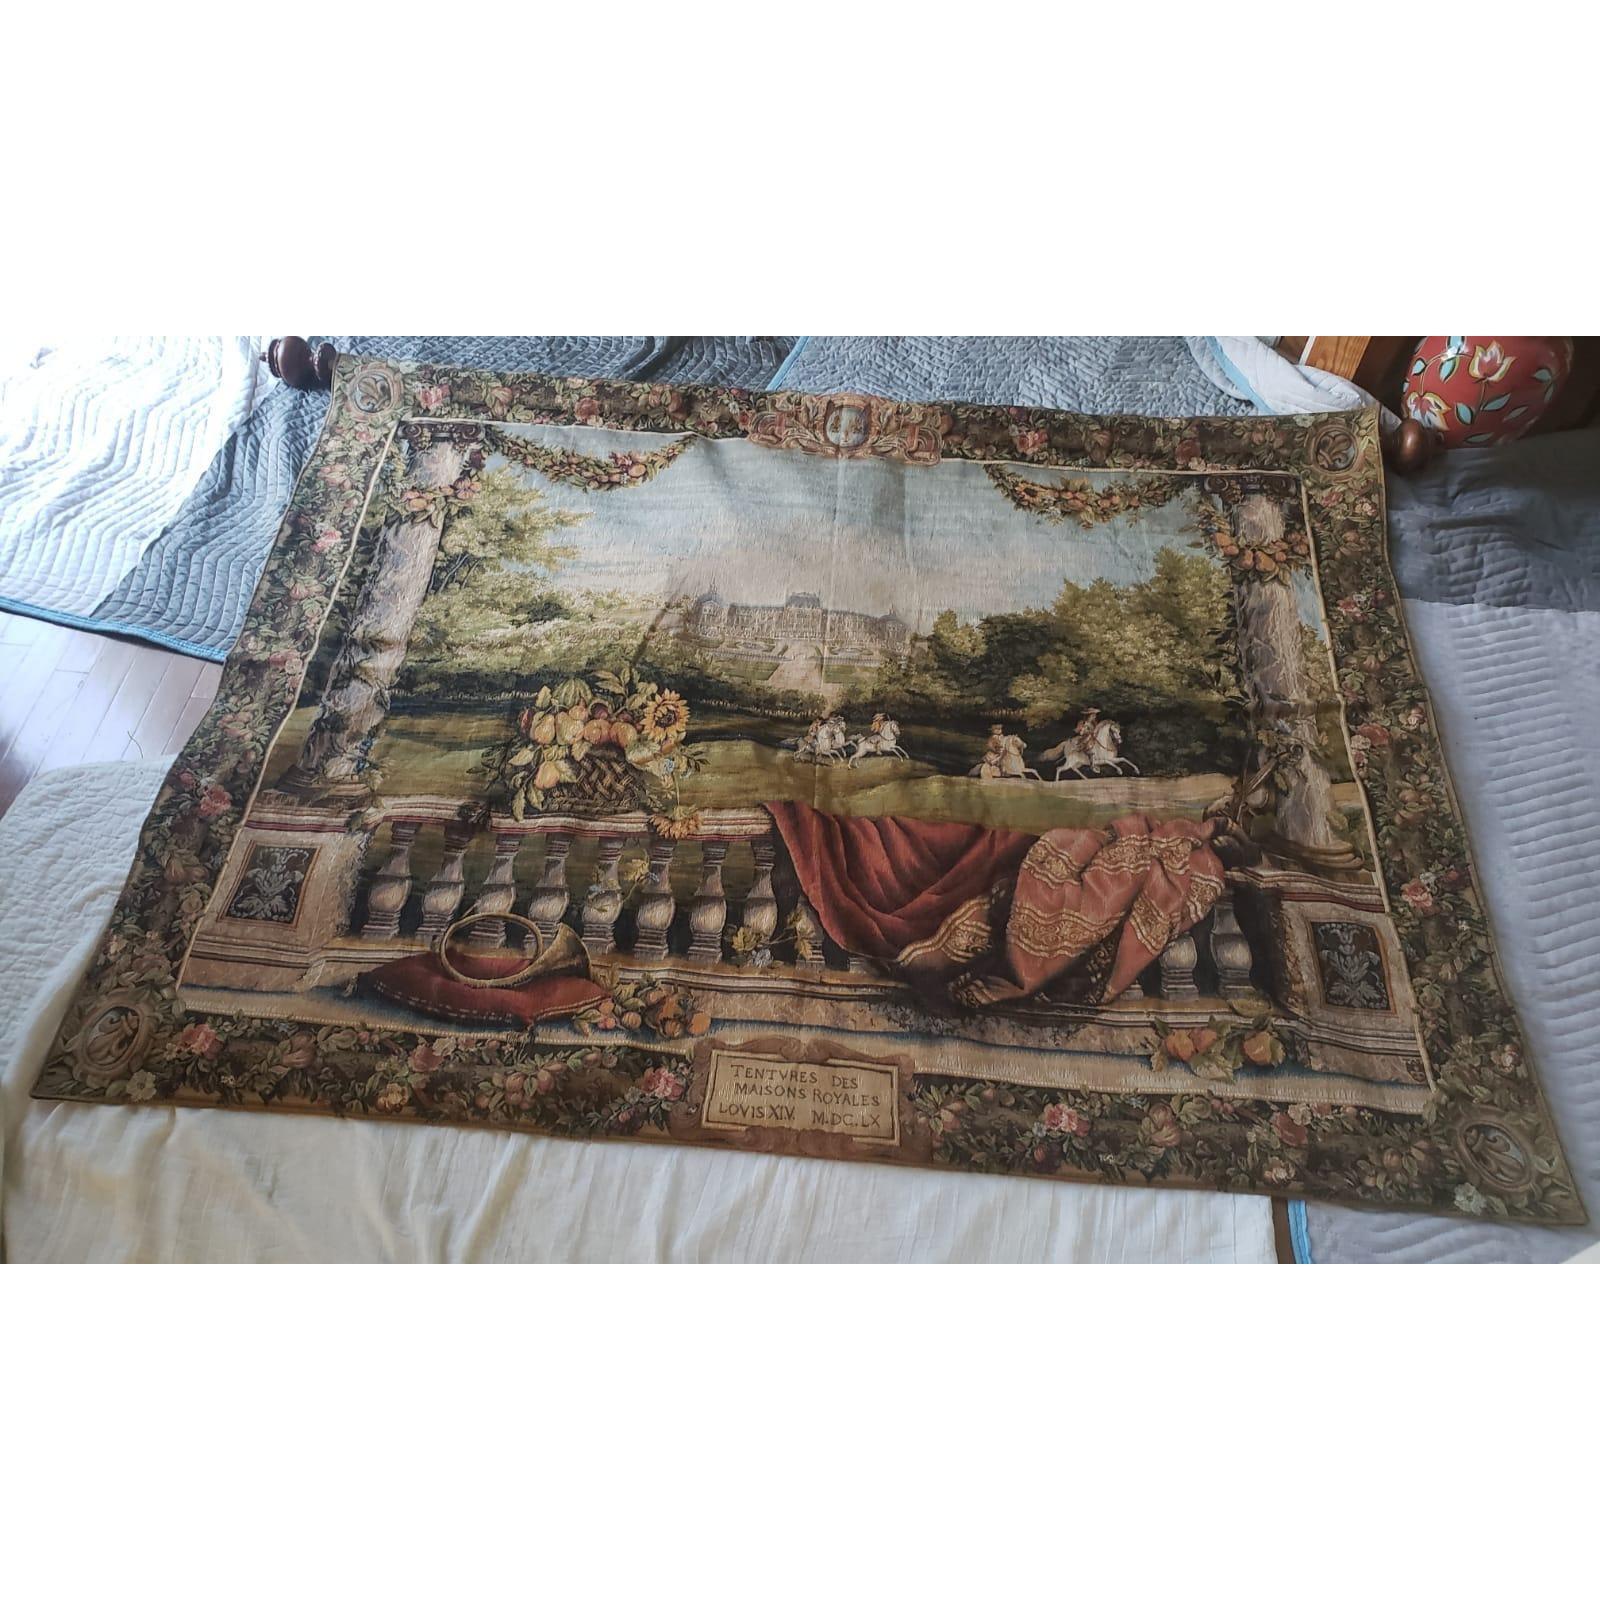 Vintage Large Hand-Woven Renaissance-Style Wall Hanging Tapestry 1